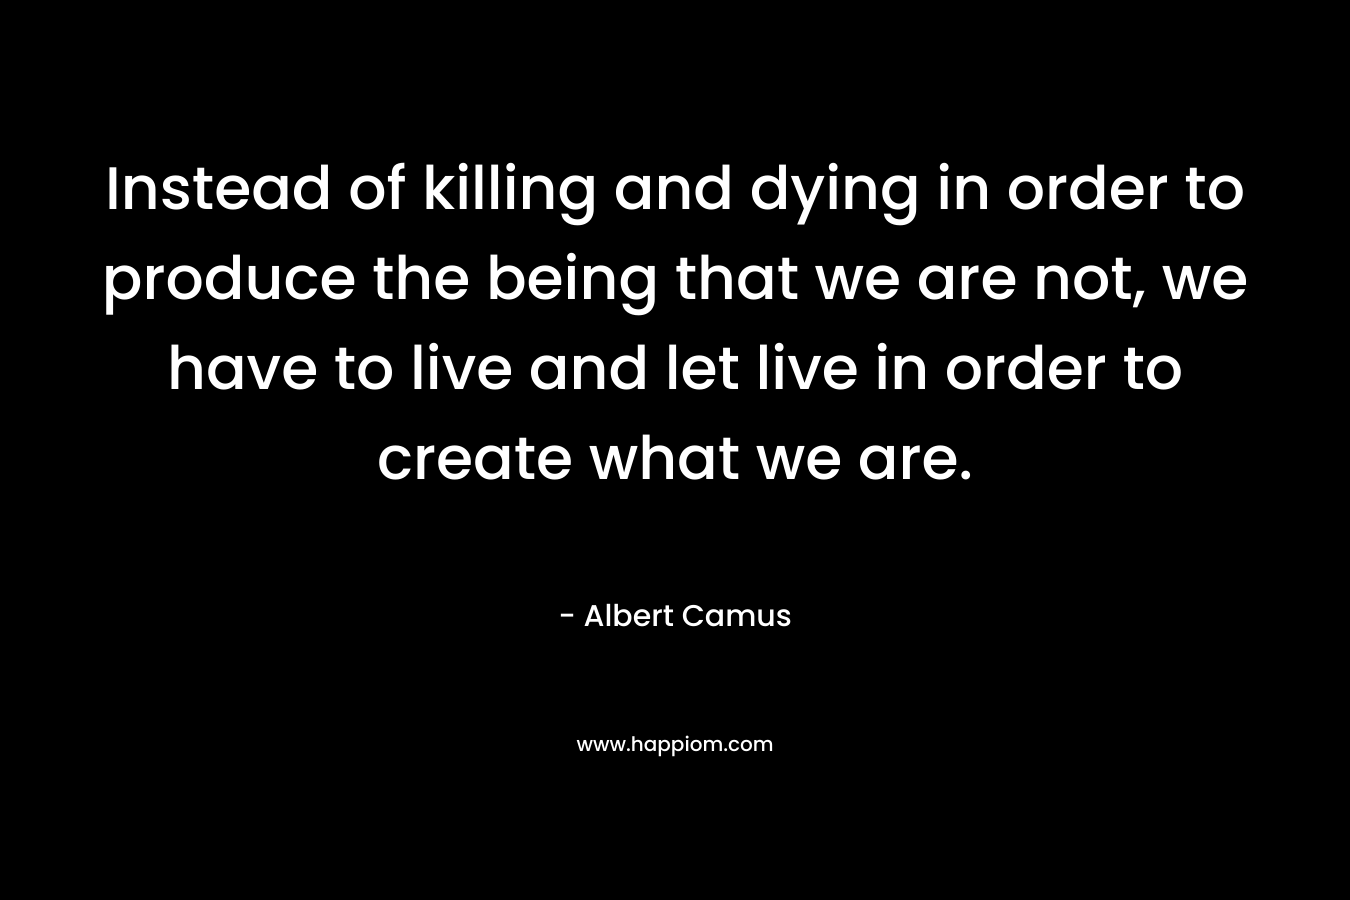 Instead of killing and dying in order to produce the being that we are not, we have to live and let live in order to create what we are.